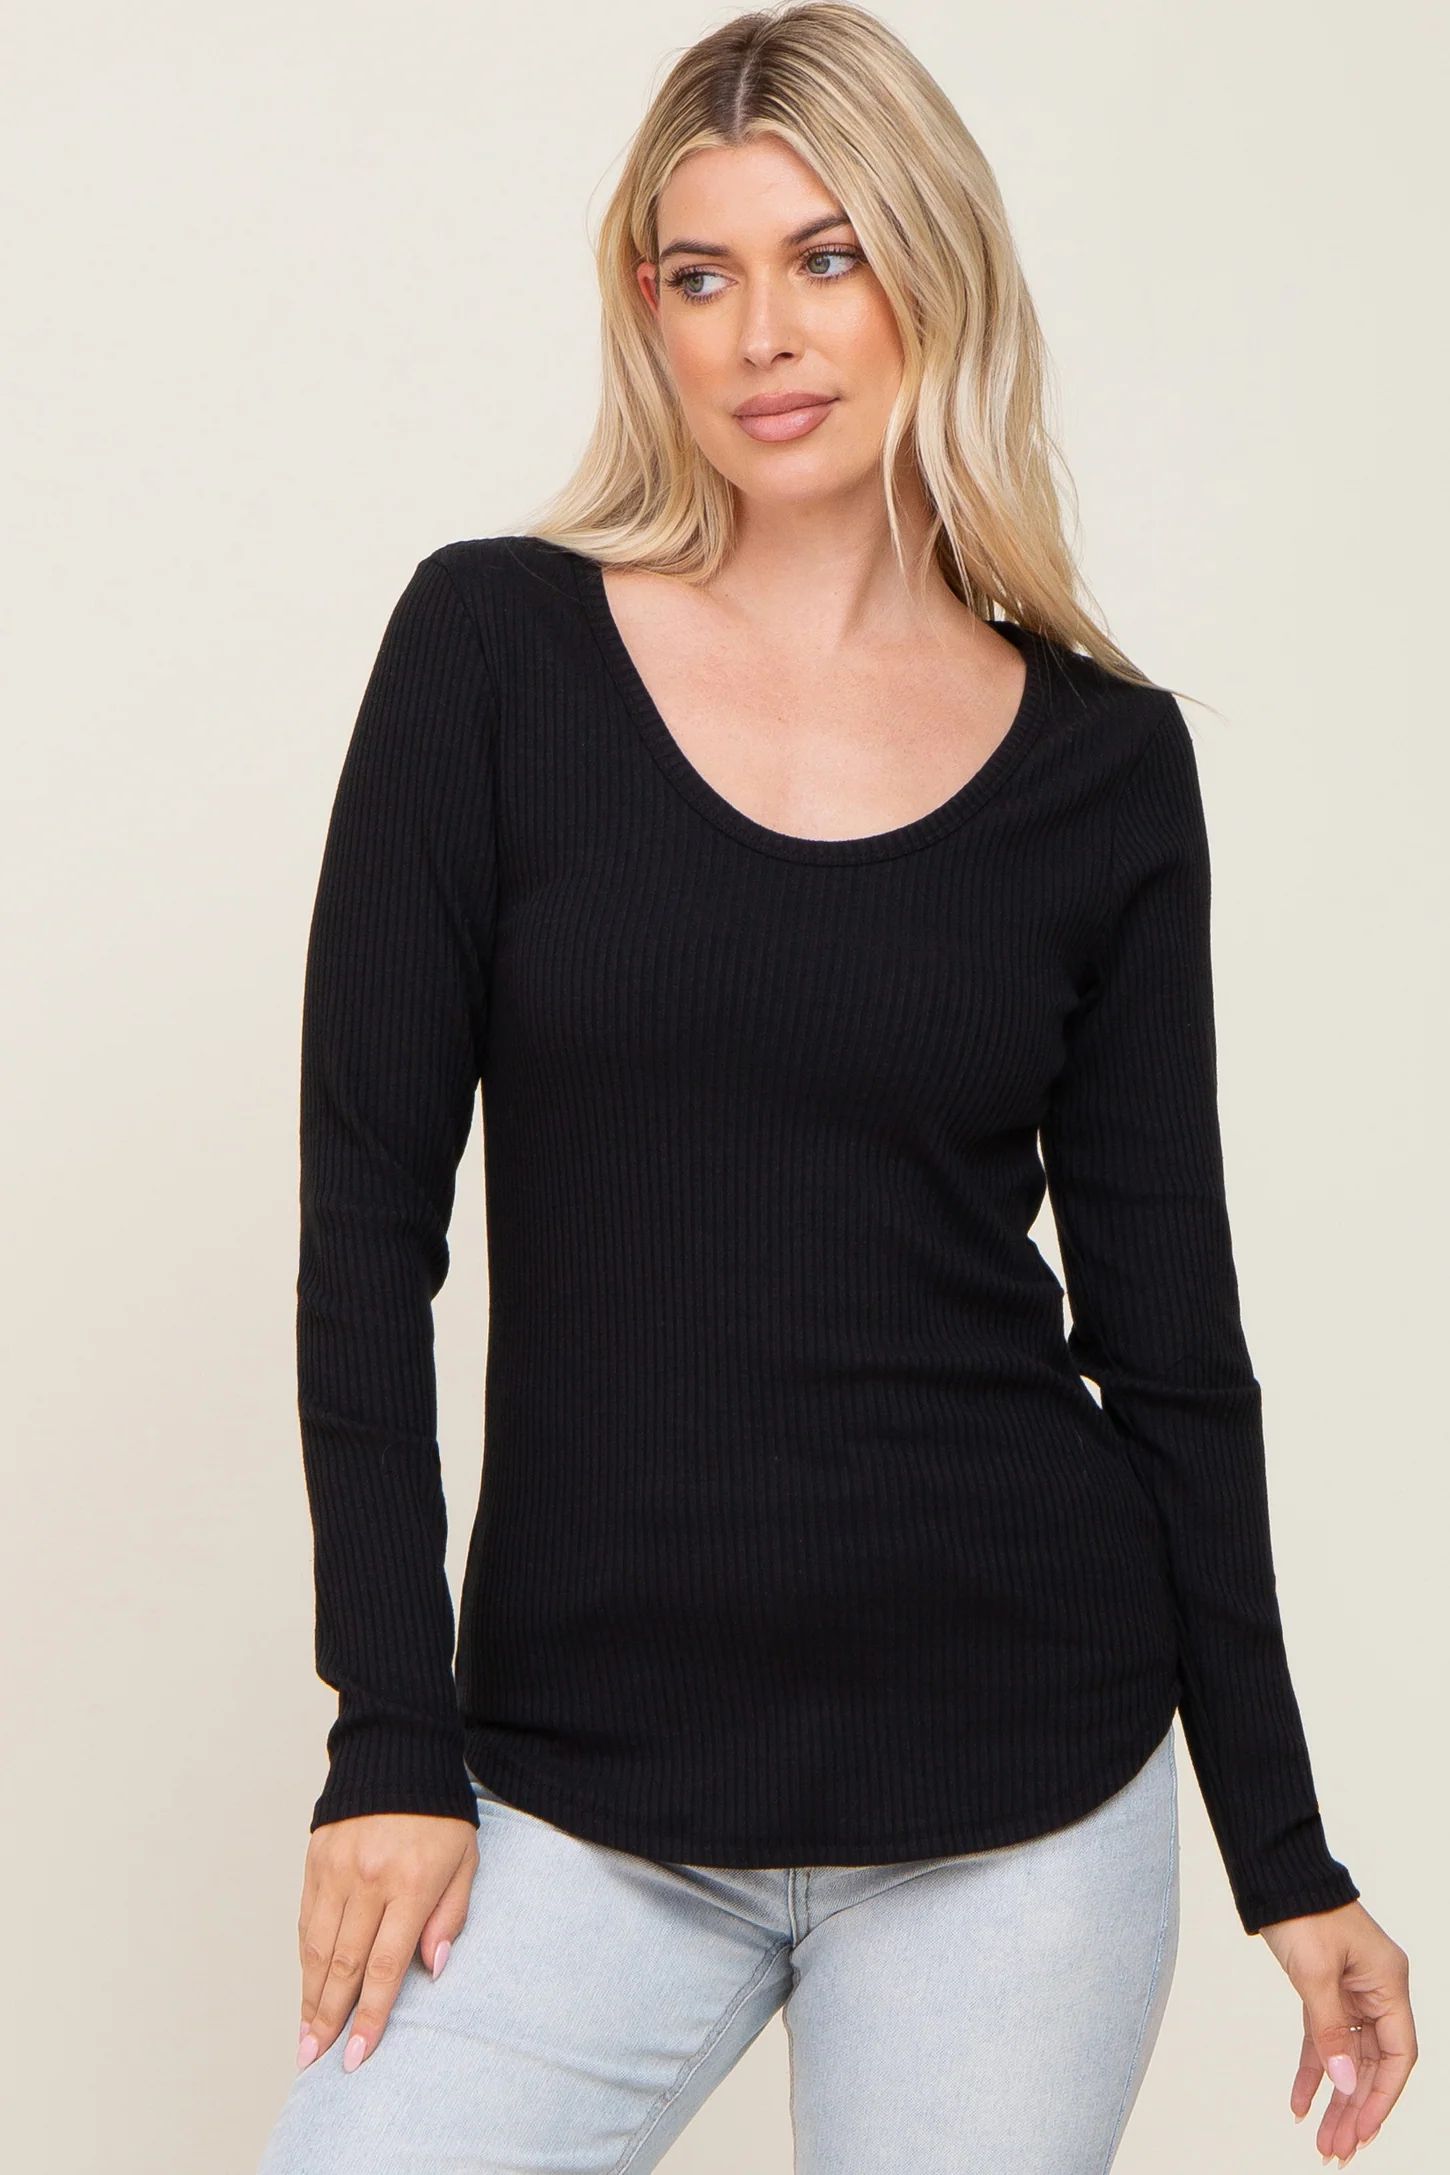 Black Ribbed Scoop Neck Long Sleeve Maternity Top | PinkBlush Maternity